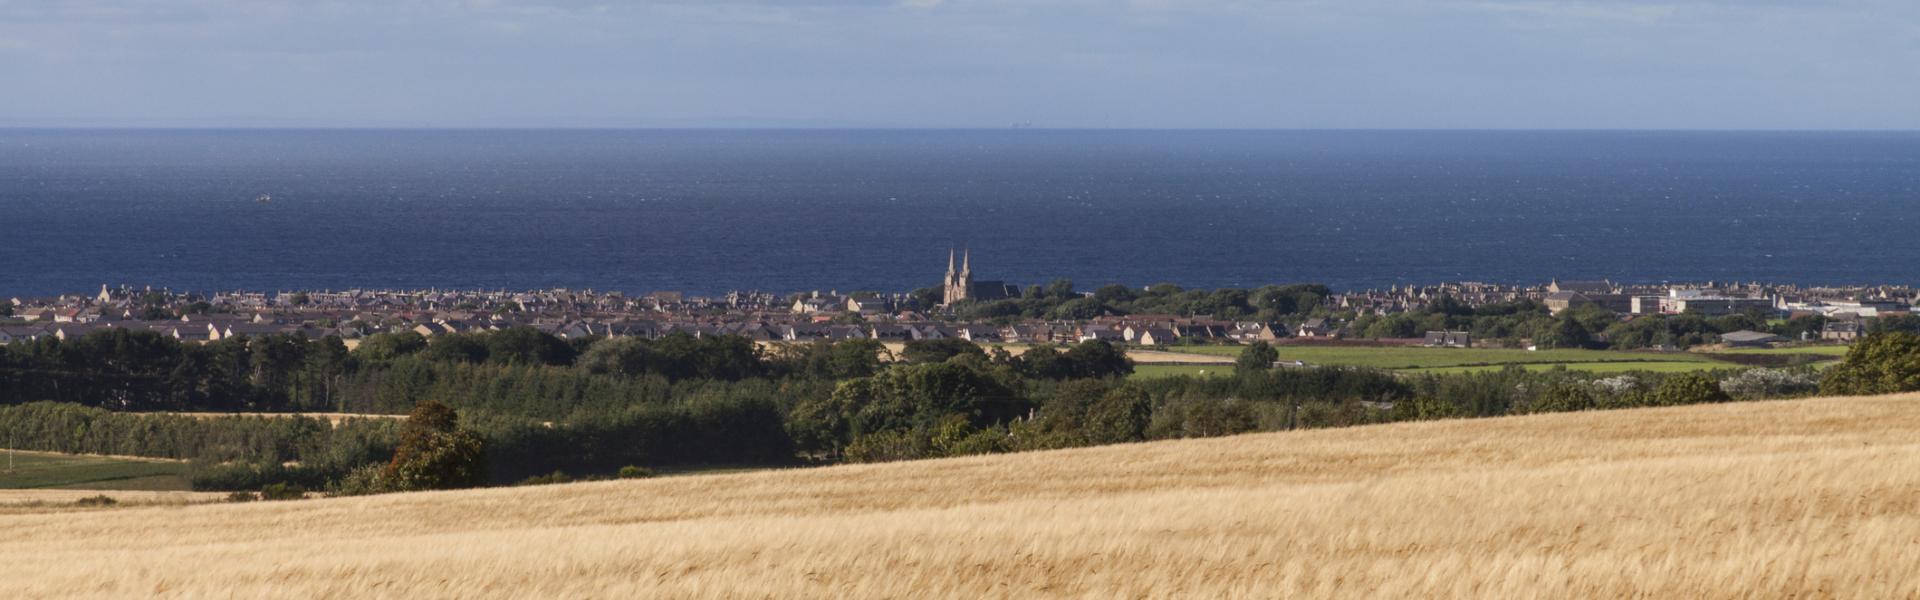 Holiday lettings & accommodation in Buckie - HomeToGo